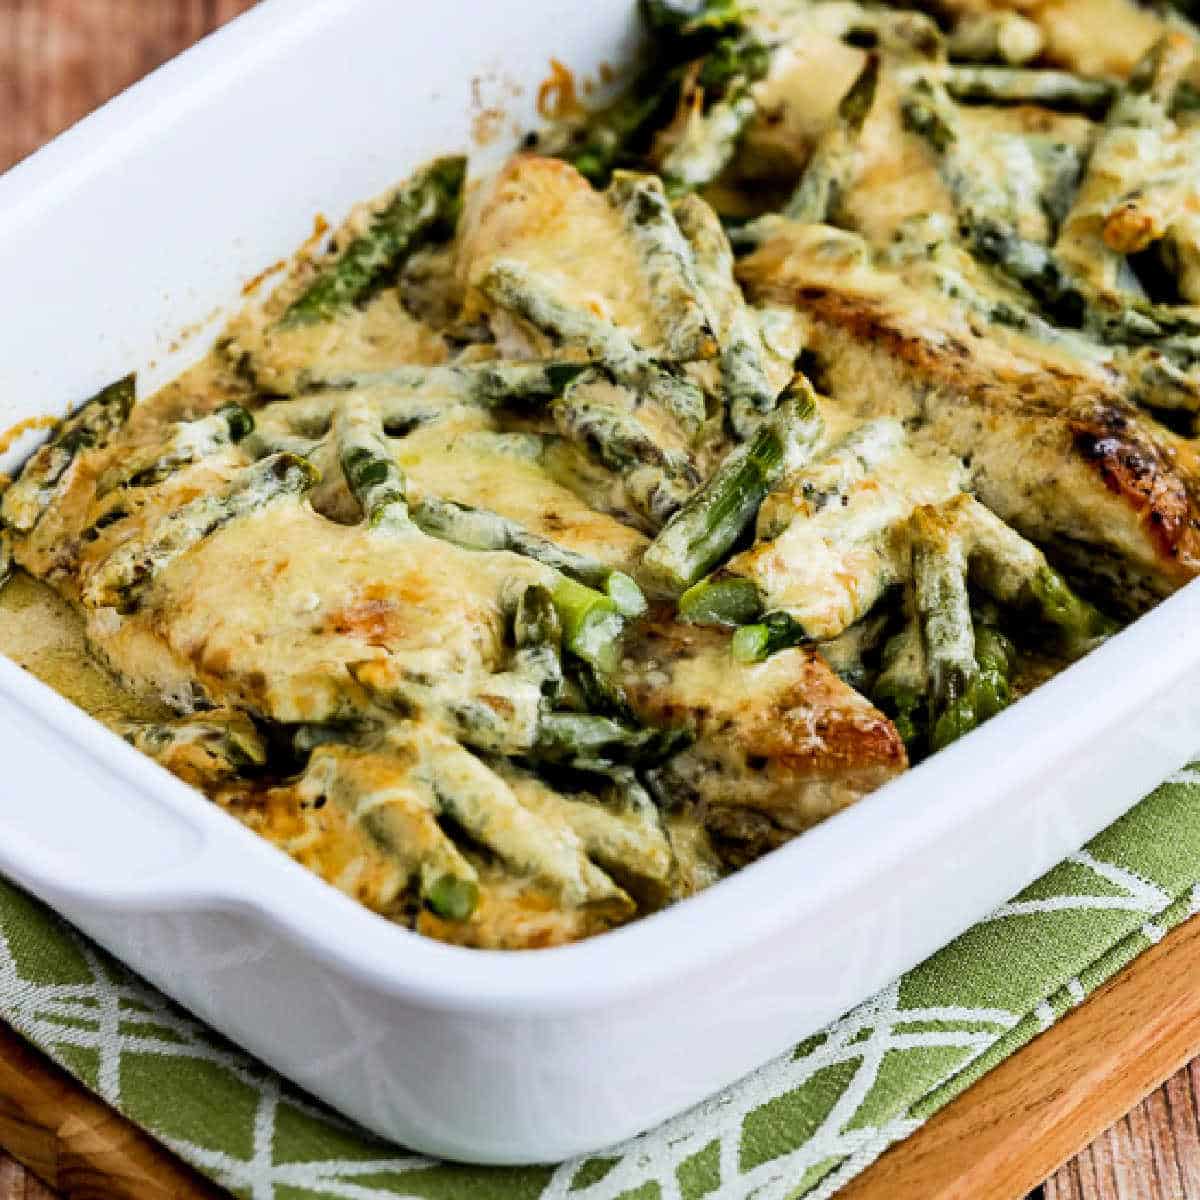 Square image of Chicken and Asparagus with Three Cheeses shown in baking dish.